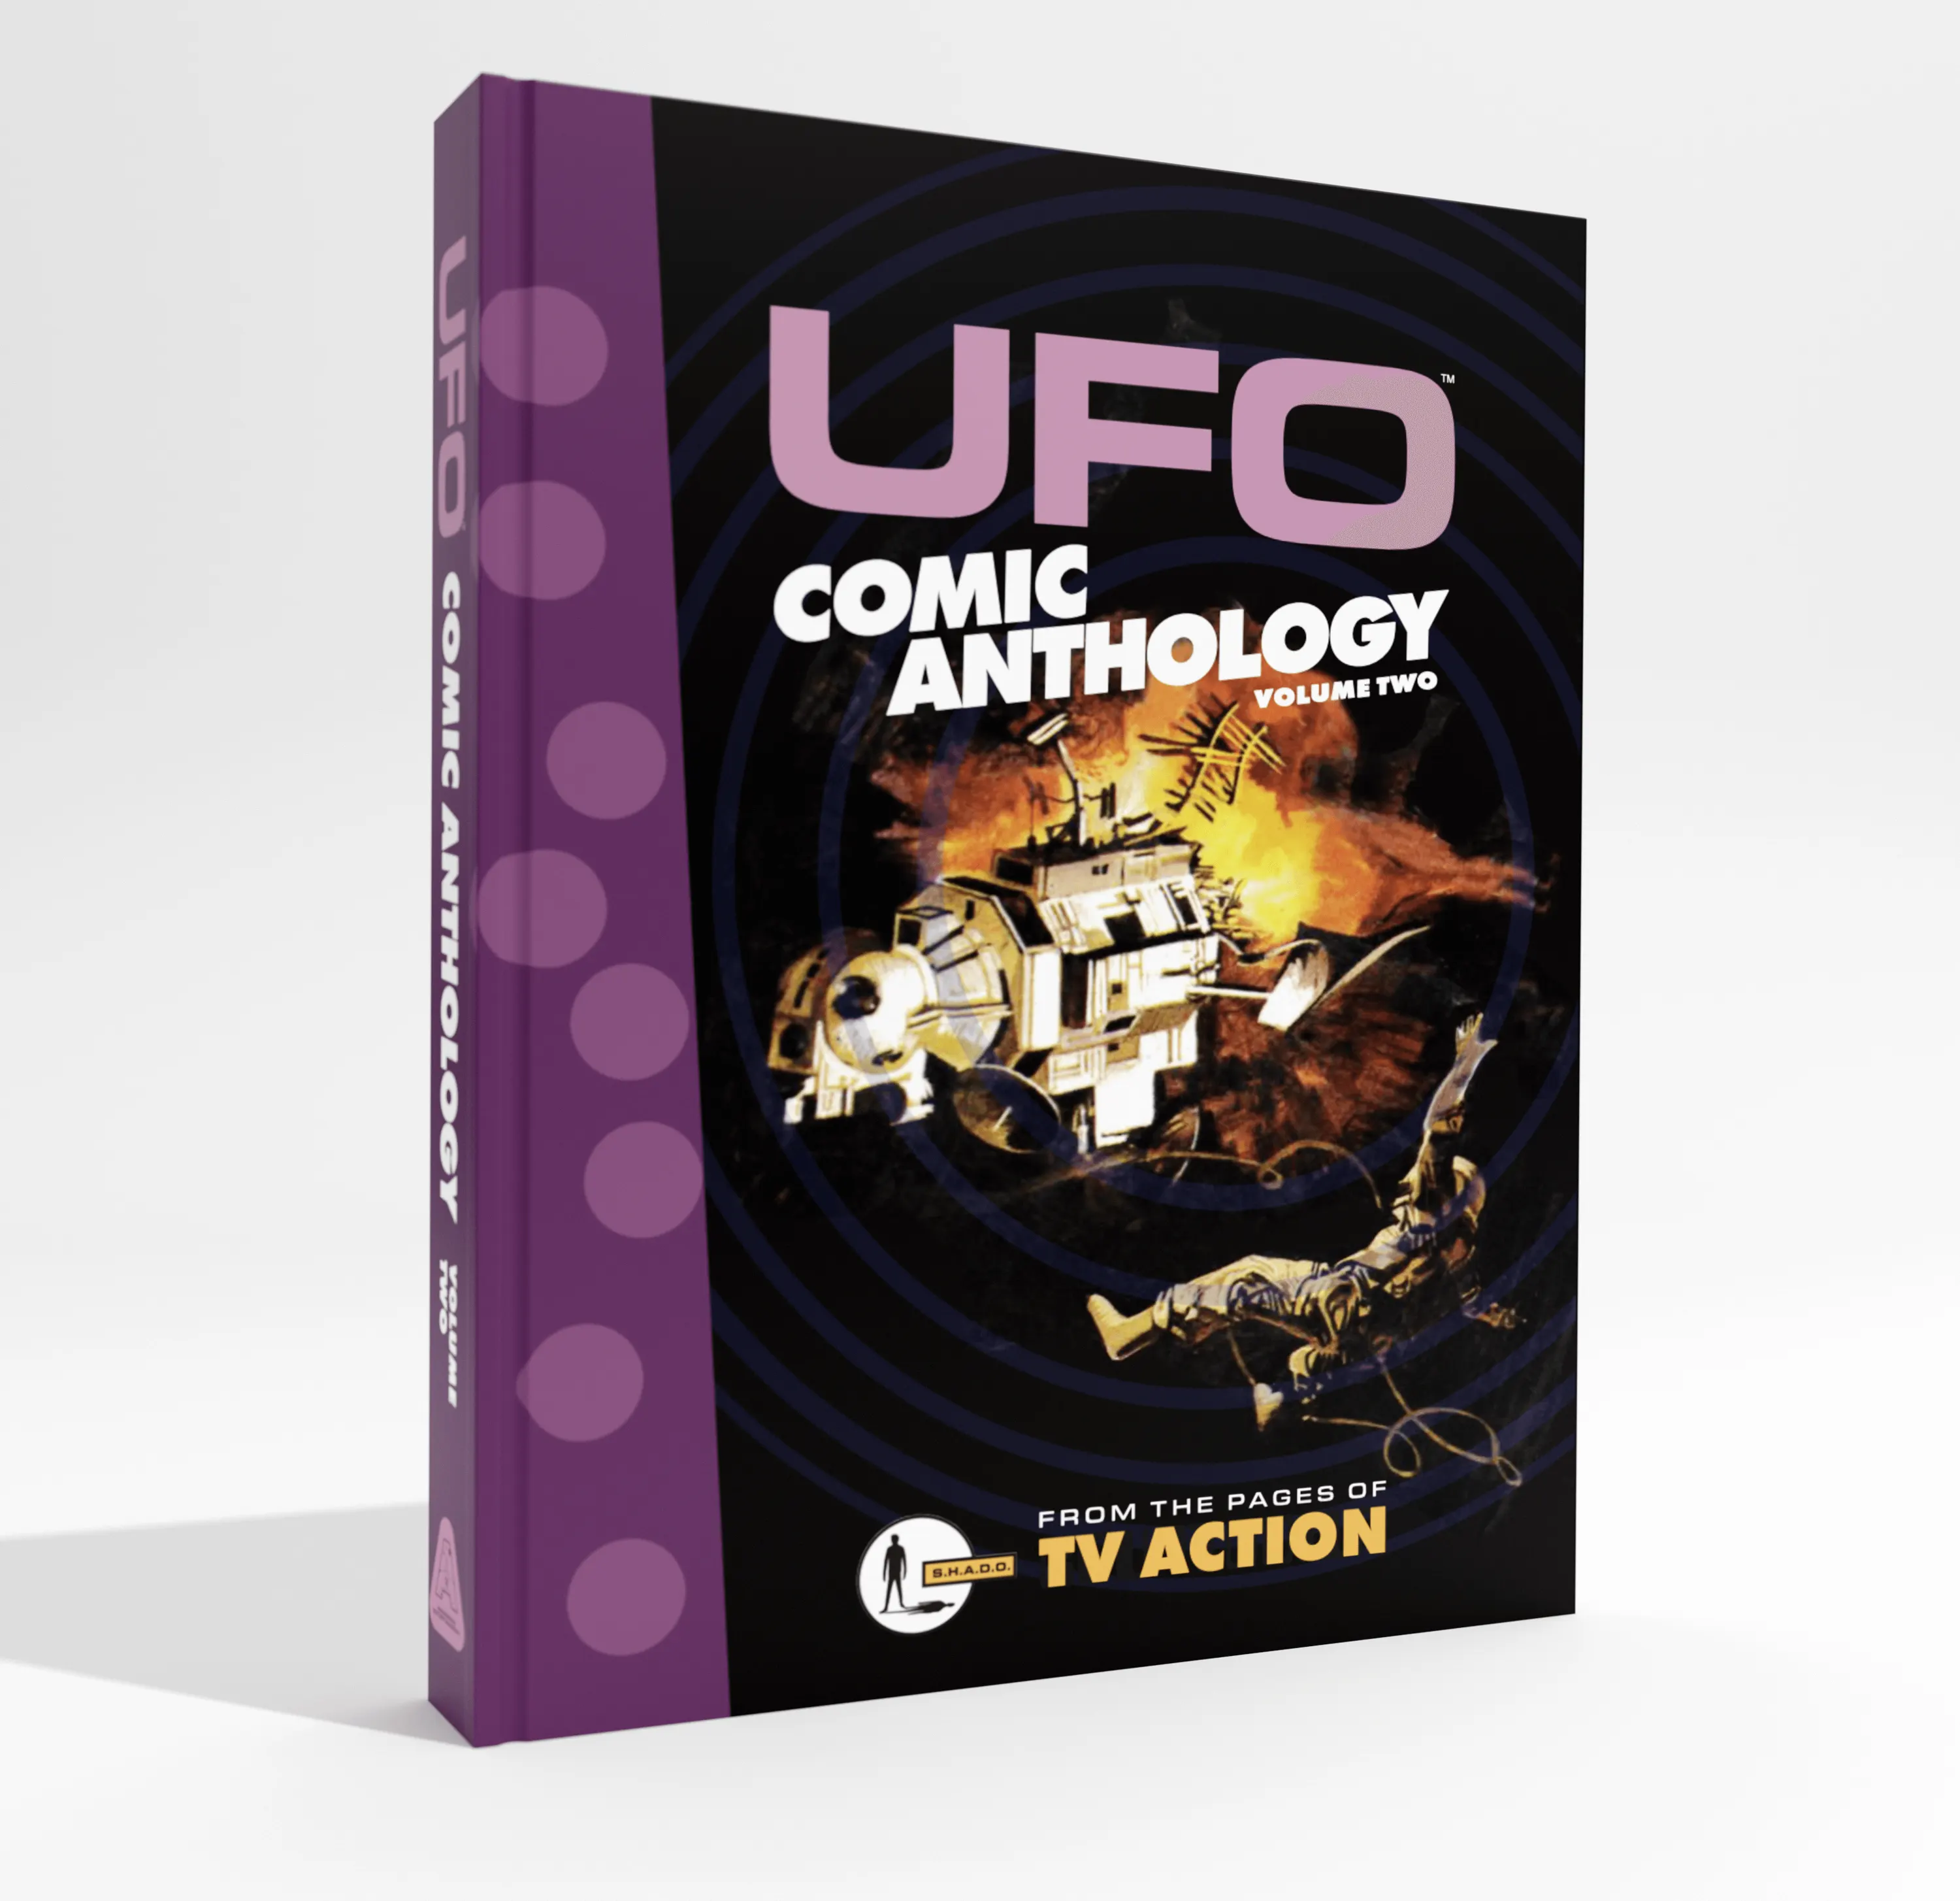 UFO Comic Anthology - Volume Two - Cover